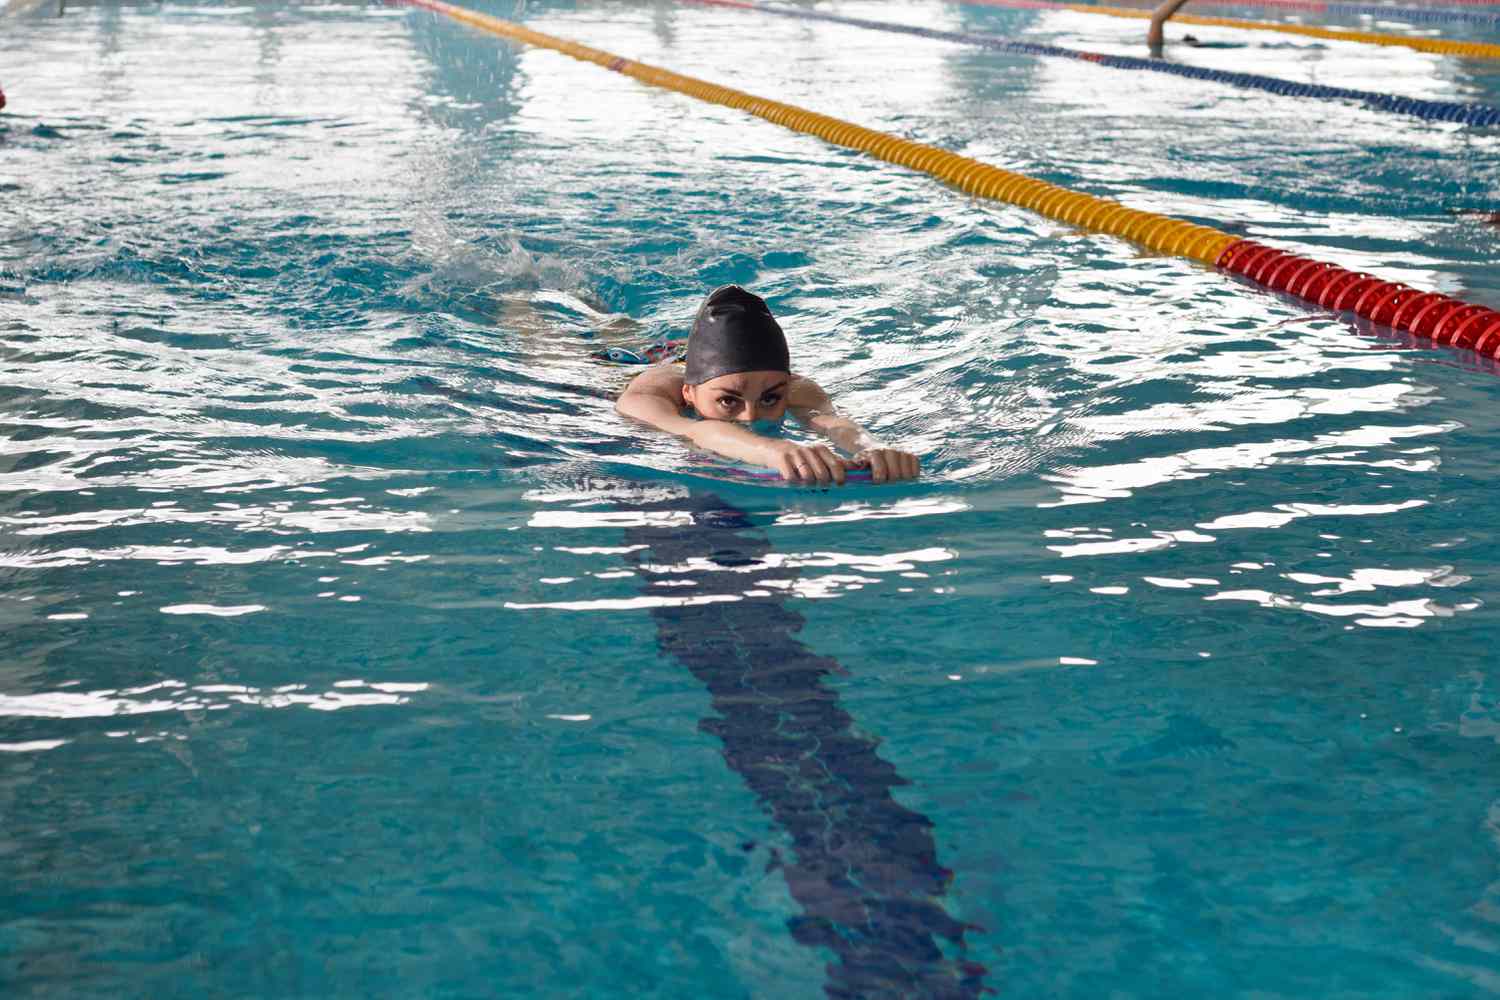 A young girl swims in the pool with a supporting Board for practicing smooth movement on the surface of the track.